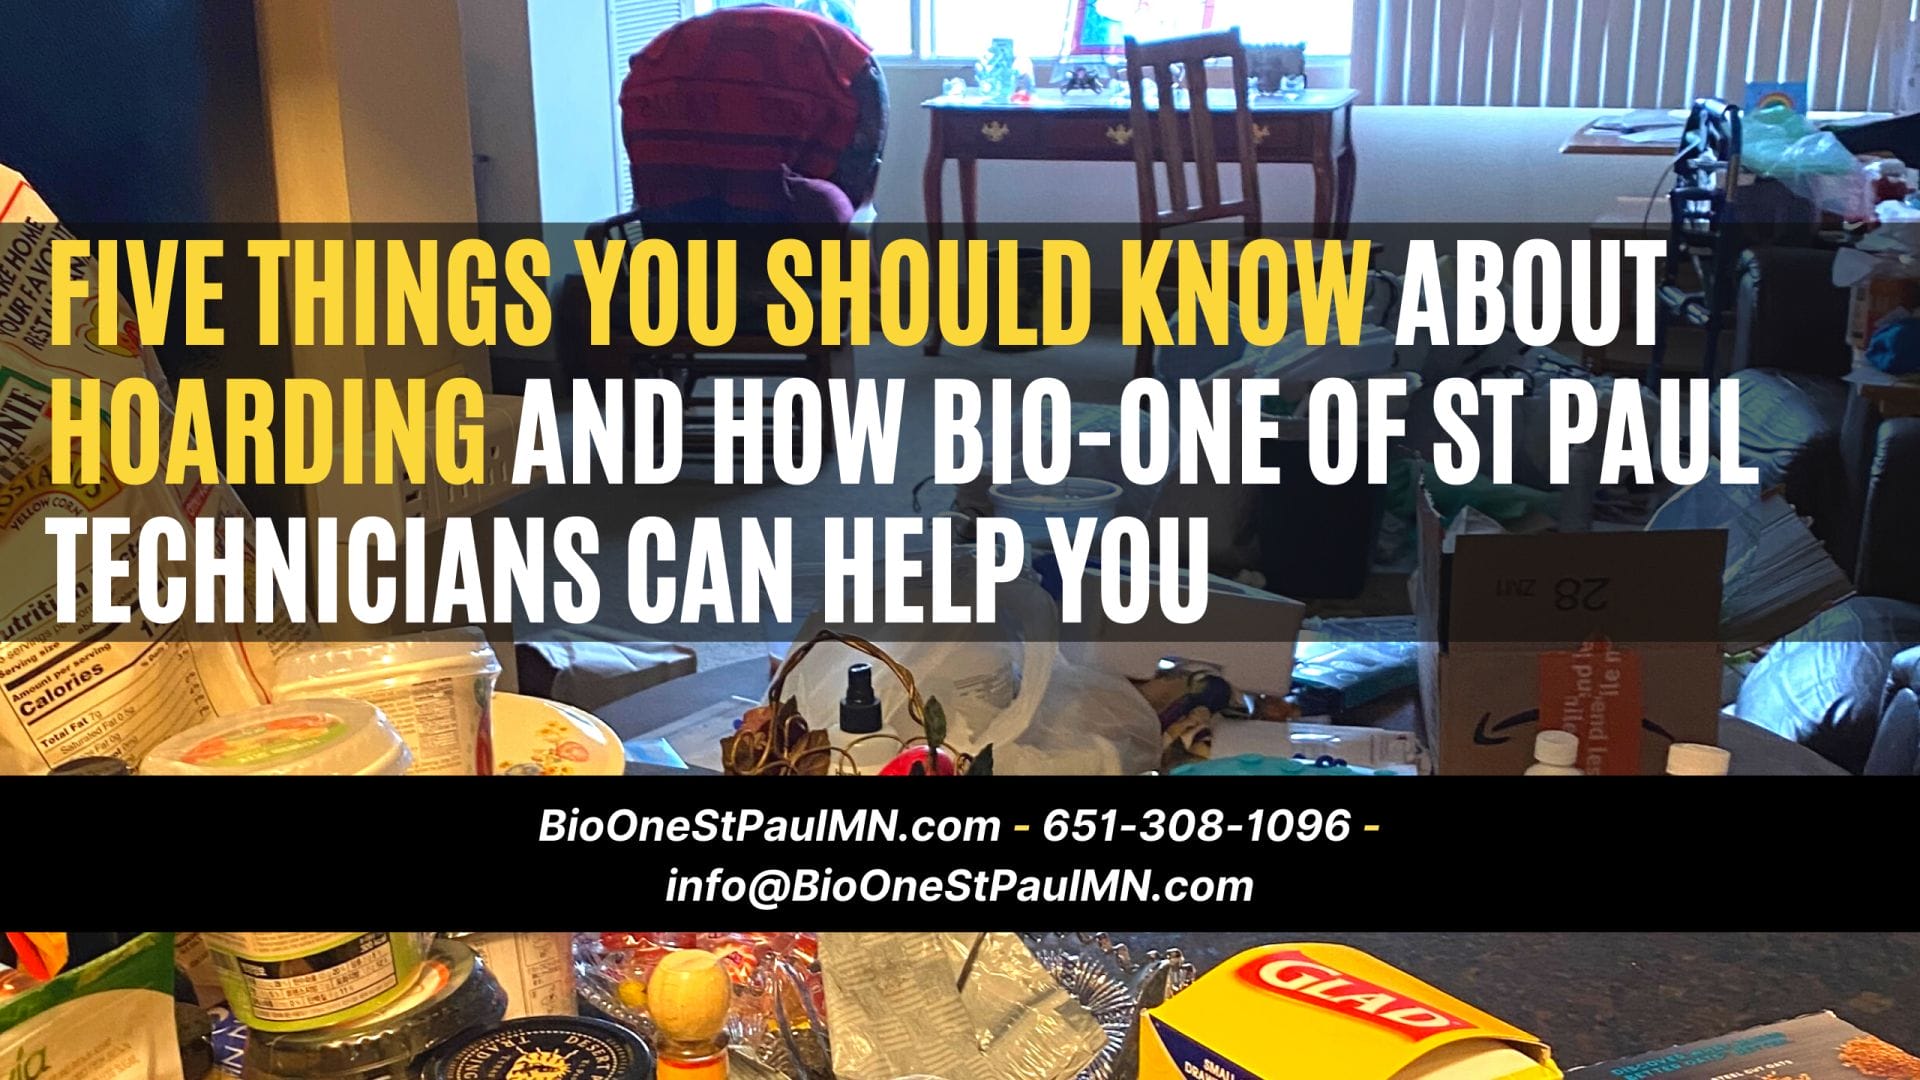 Five things you should know about hoarding and how Bio-One of St Paul technicians can help you